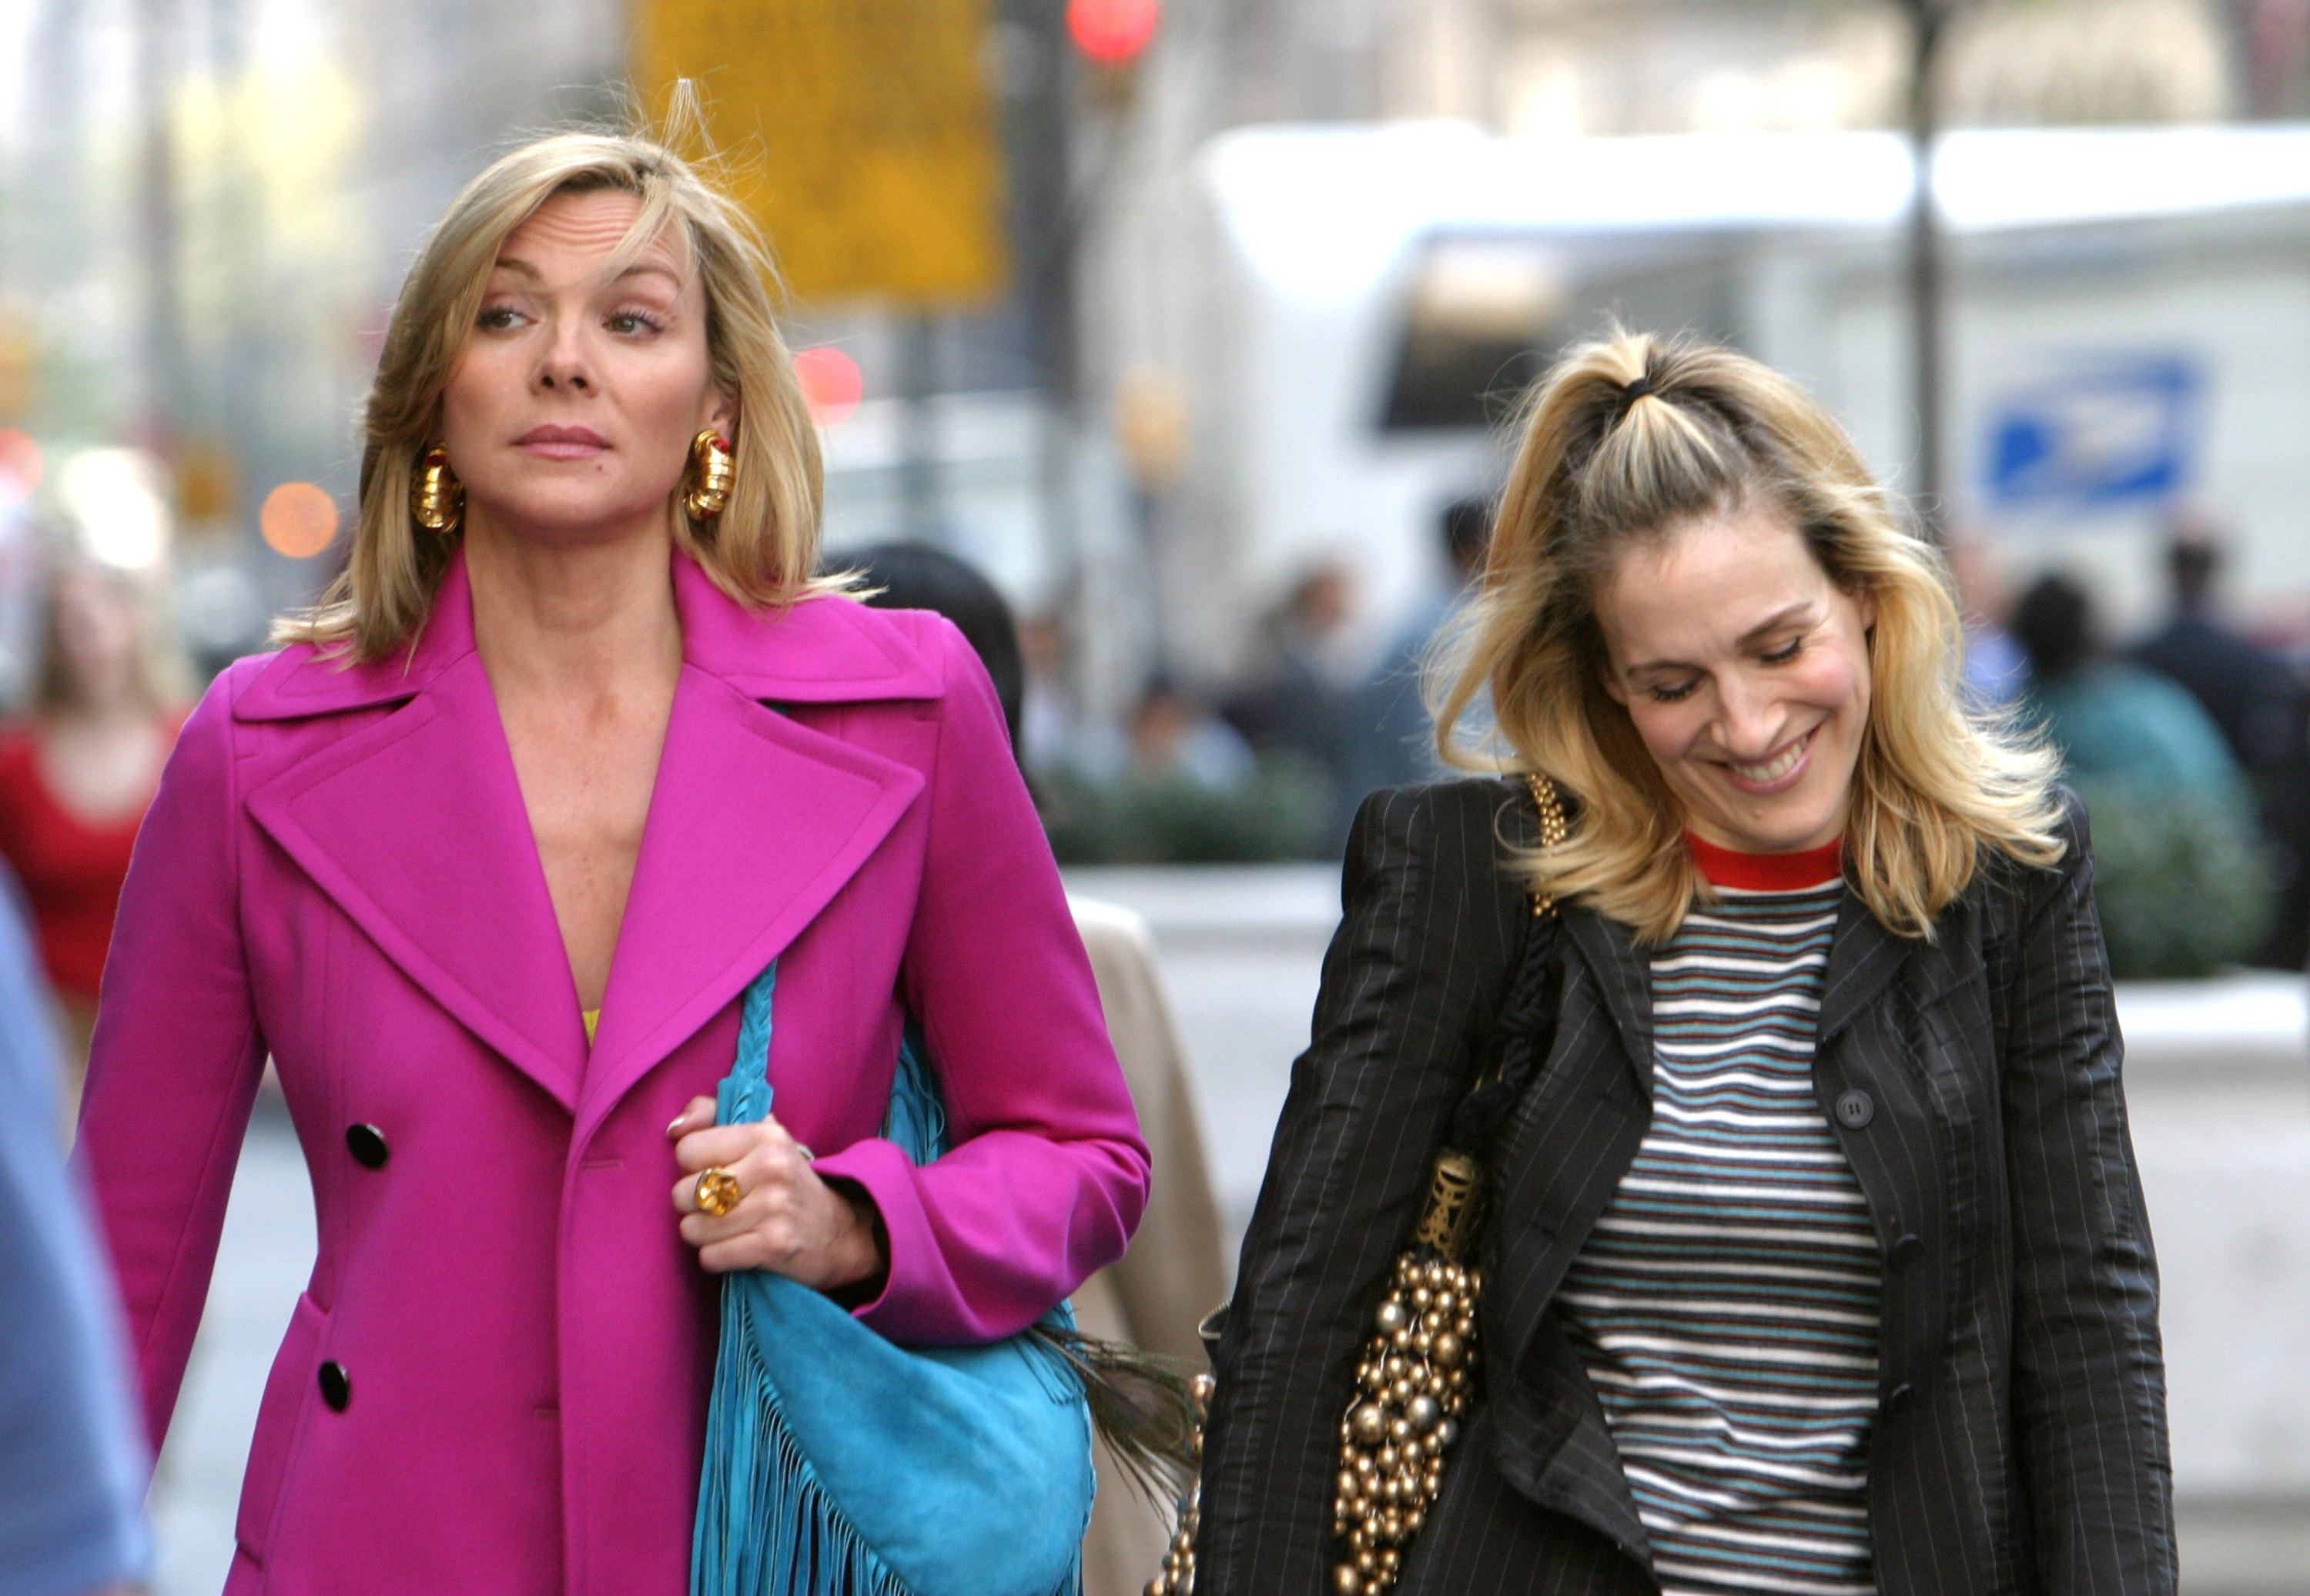 Kim Cattrall as Samantha Jones and Sarah Jessica Parker as Carrie Bradshaw walk down a Manhattan street while filming an episode of 'Sex and the City'